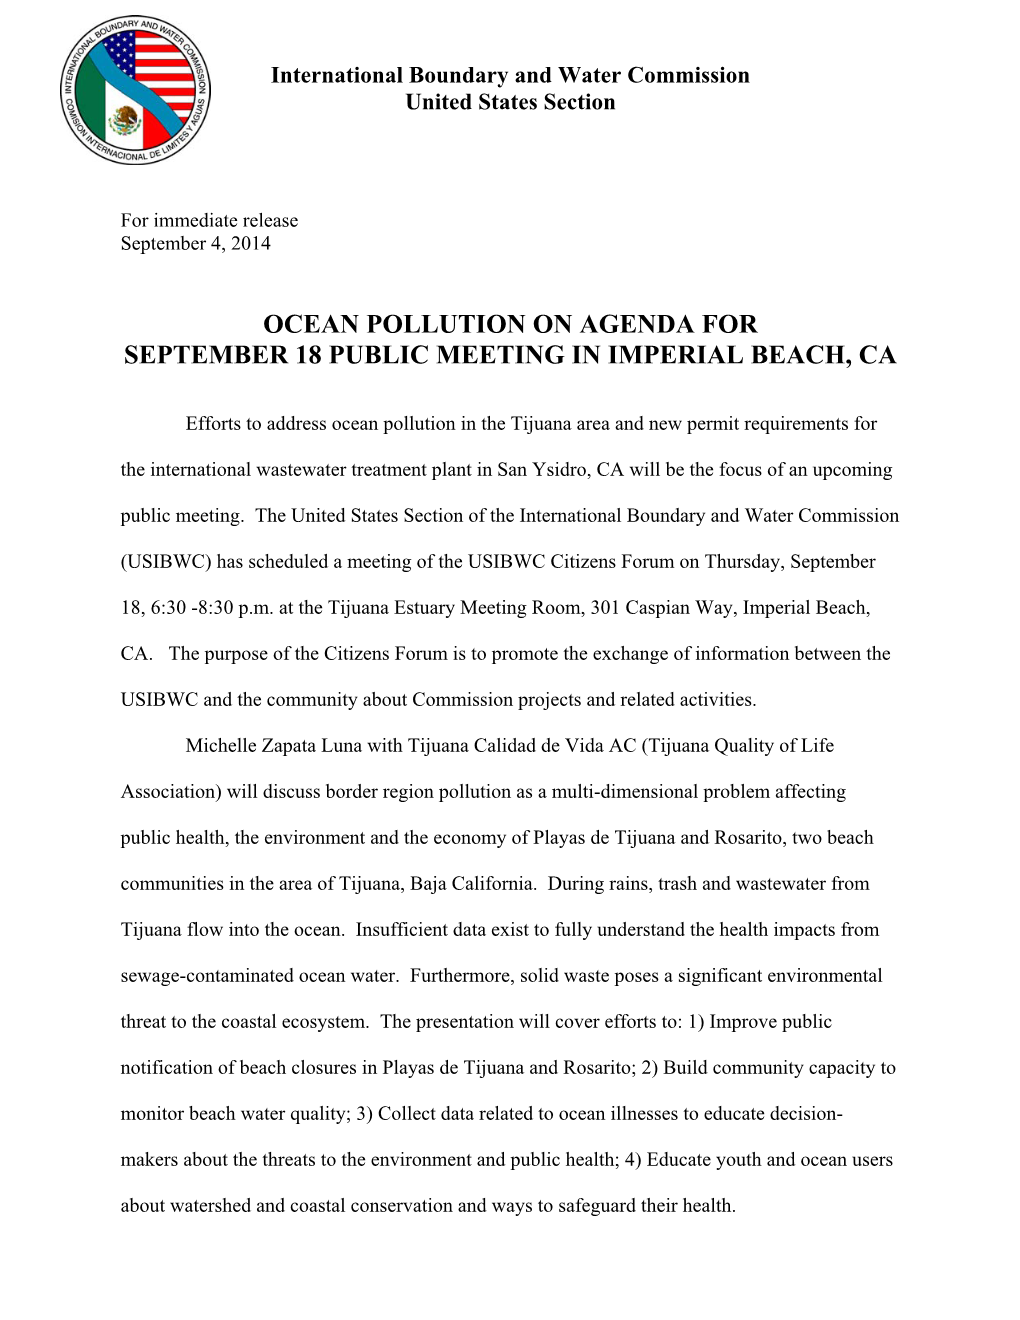 Ocean Pollution on Agenda for September 18 Public Meeting in Imperial Beach, Ca